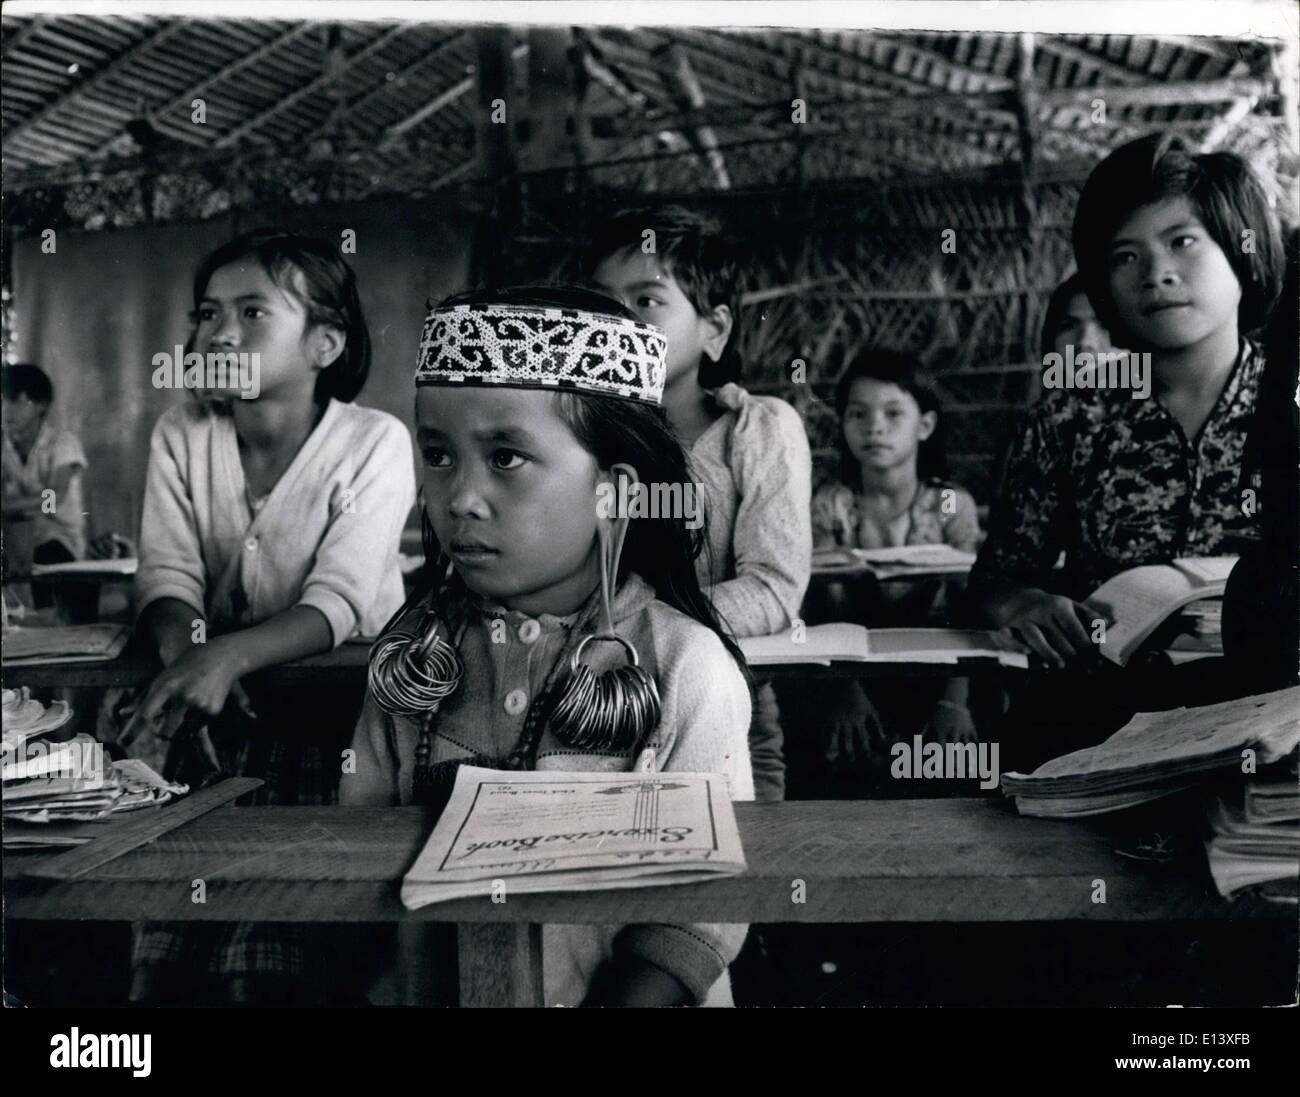 Mar. 27, 2012 - Drooping? Bejewelled Earloses - Aknd Ank Ex-Pupil At Ohio state Univ. That's Sarawak's Jungle school: A small girl sits demurely at her desk, her exercise book before her, hands in her lap, eyes fixed on her teacher just like any other good pupil. But she has a beaded crown on her head and her little ears are weighed down, dropping decorated by a cluster of glittering heavy rings. And the classroom walls are bamboo, the windows air Stock Photo